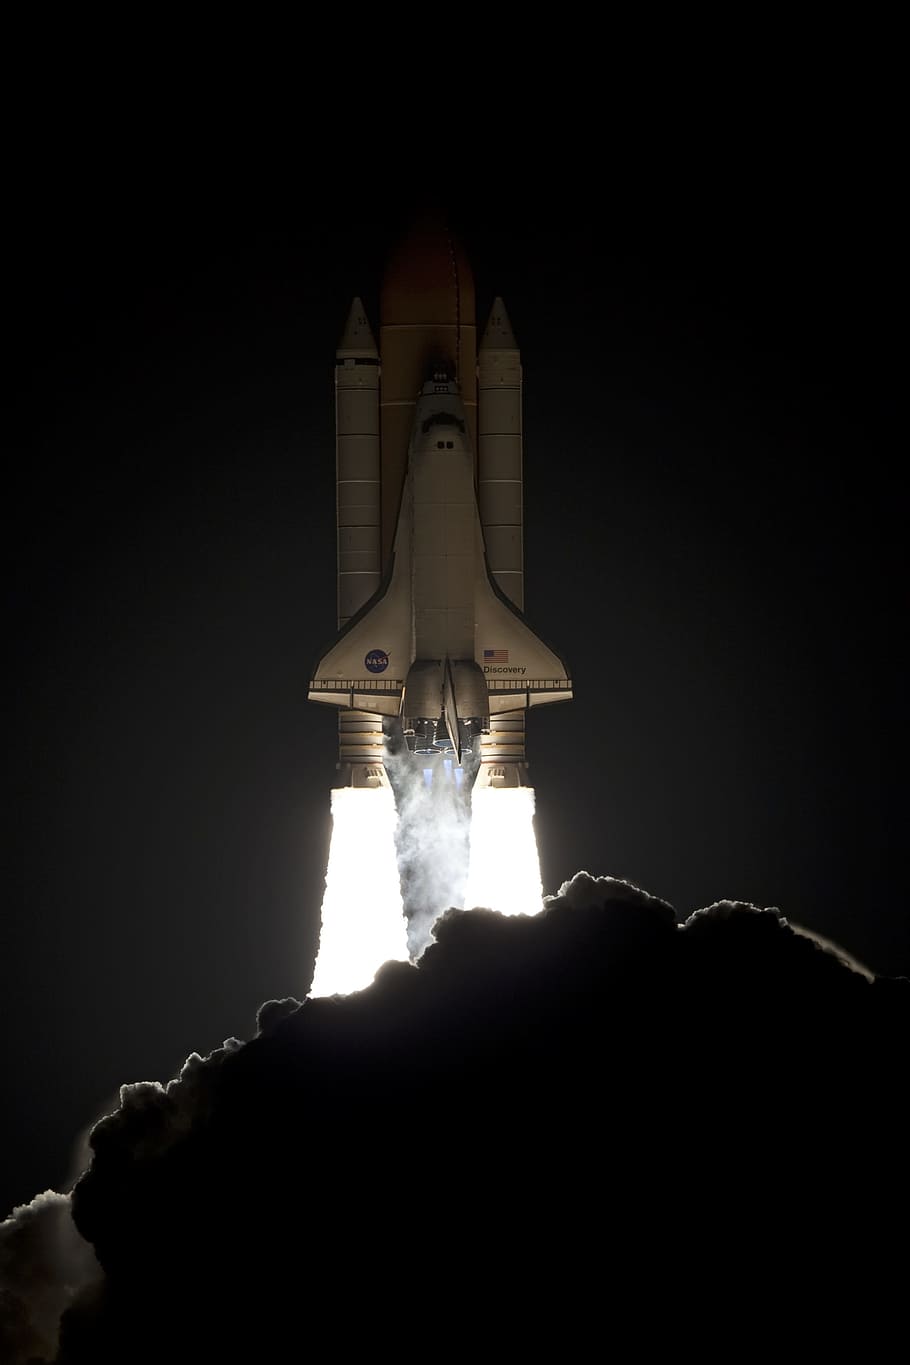 launch, liftoff, night, space shuttle, discovery, spaceship, sky, clouds, blastoff, exhaust